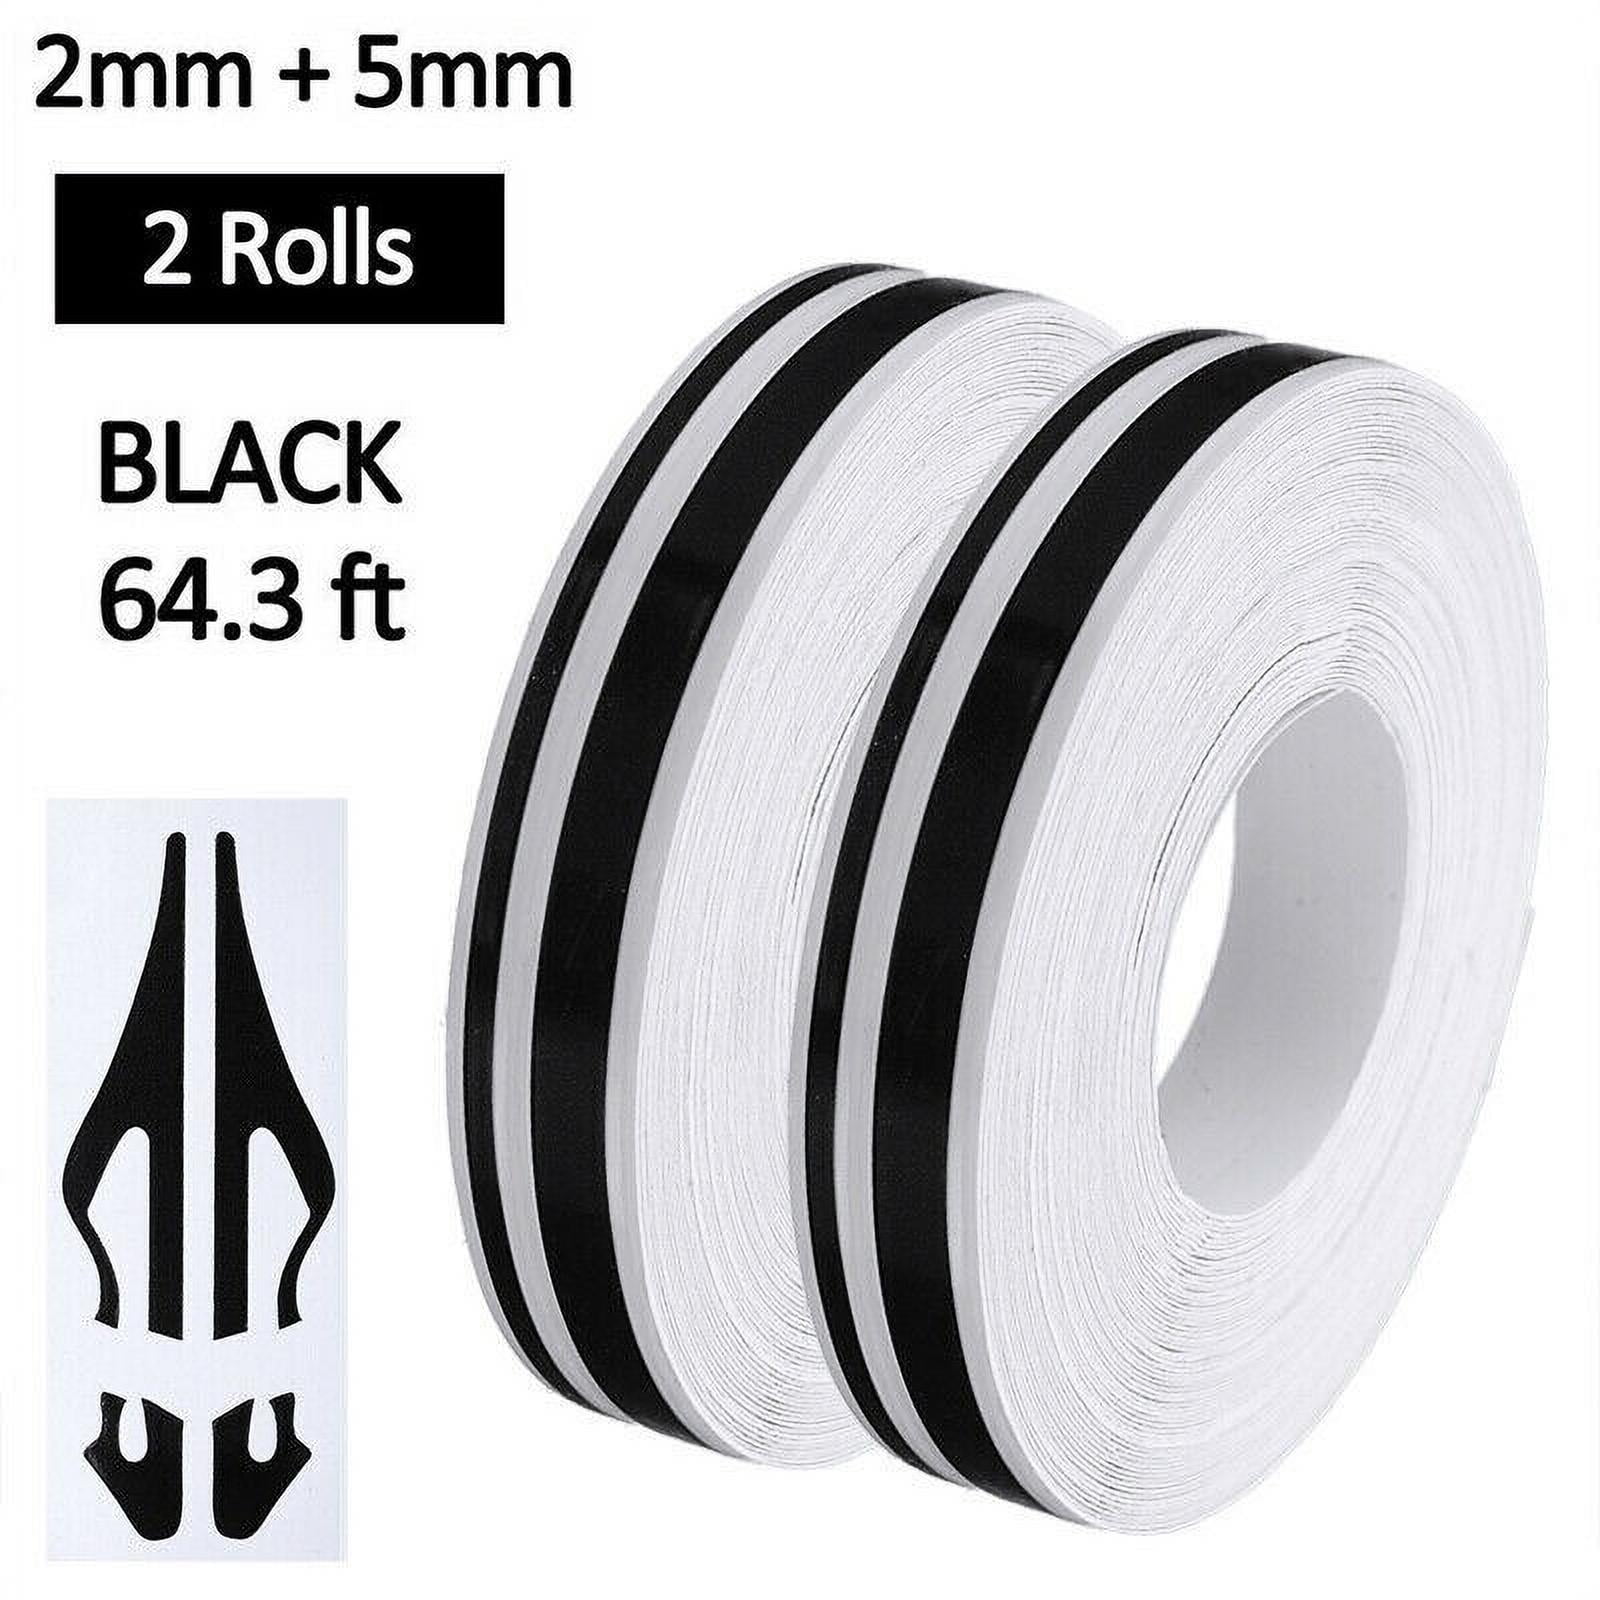 Rediamant 24mm Car Molding Emblem Tape Automotive Double Sided Heavy Duty Extreme Super Strong Sticky Auto Attachment Waterproof Weatherproof